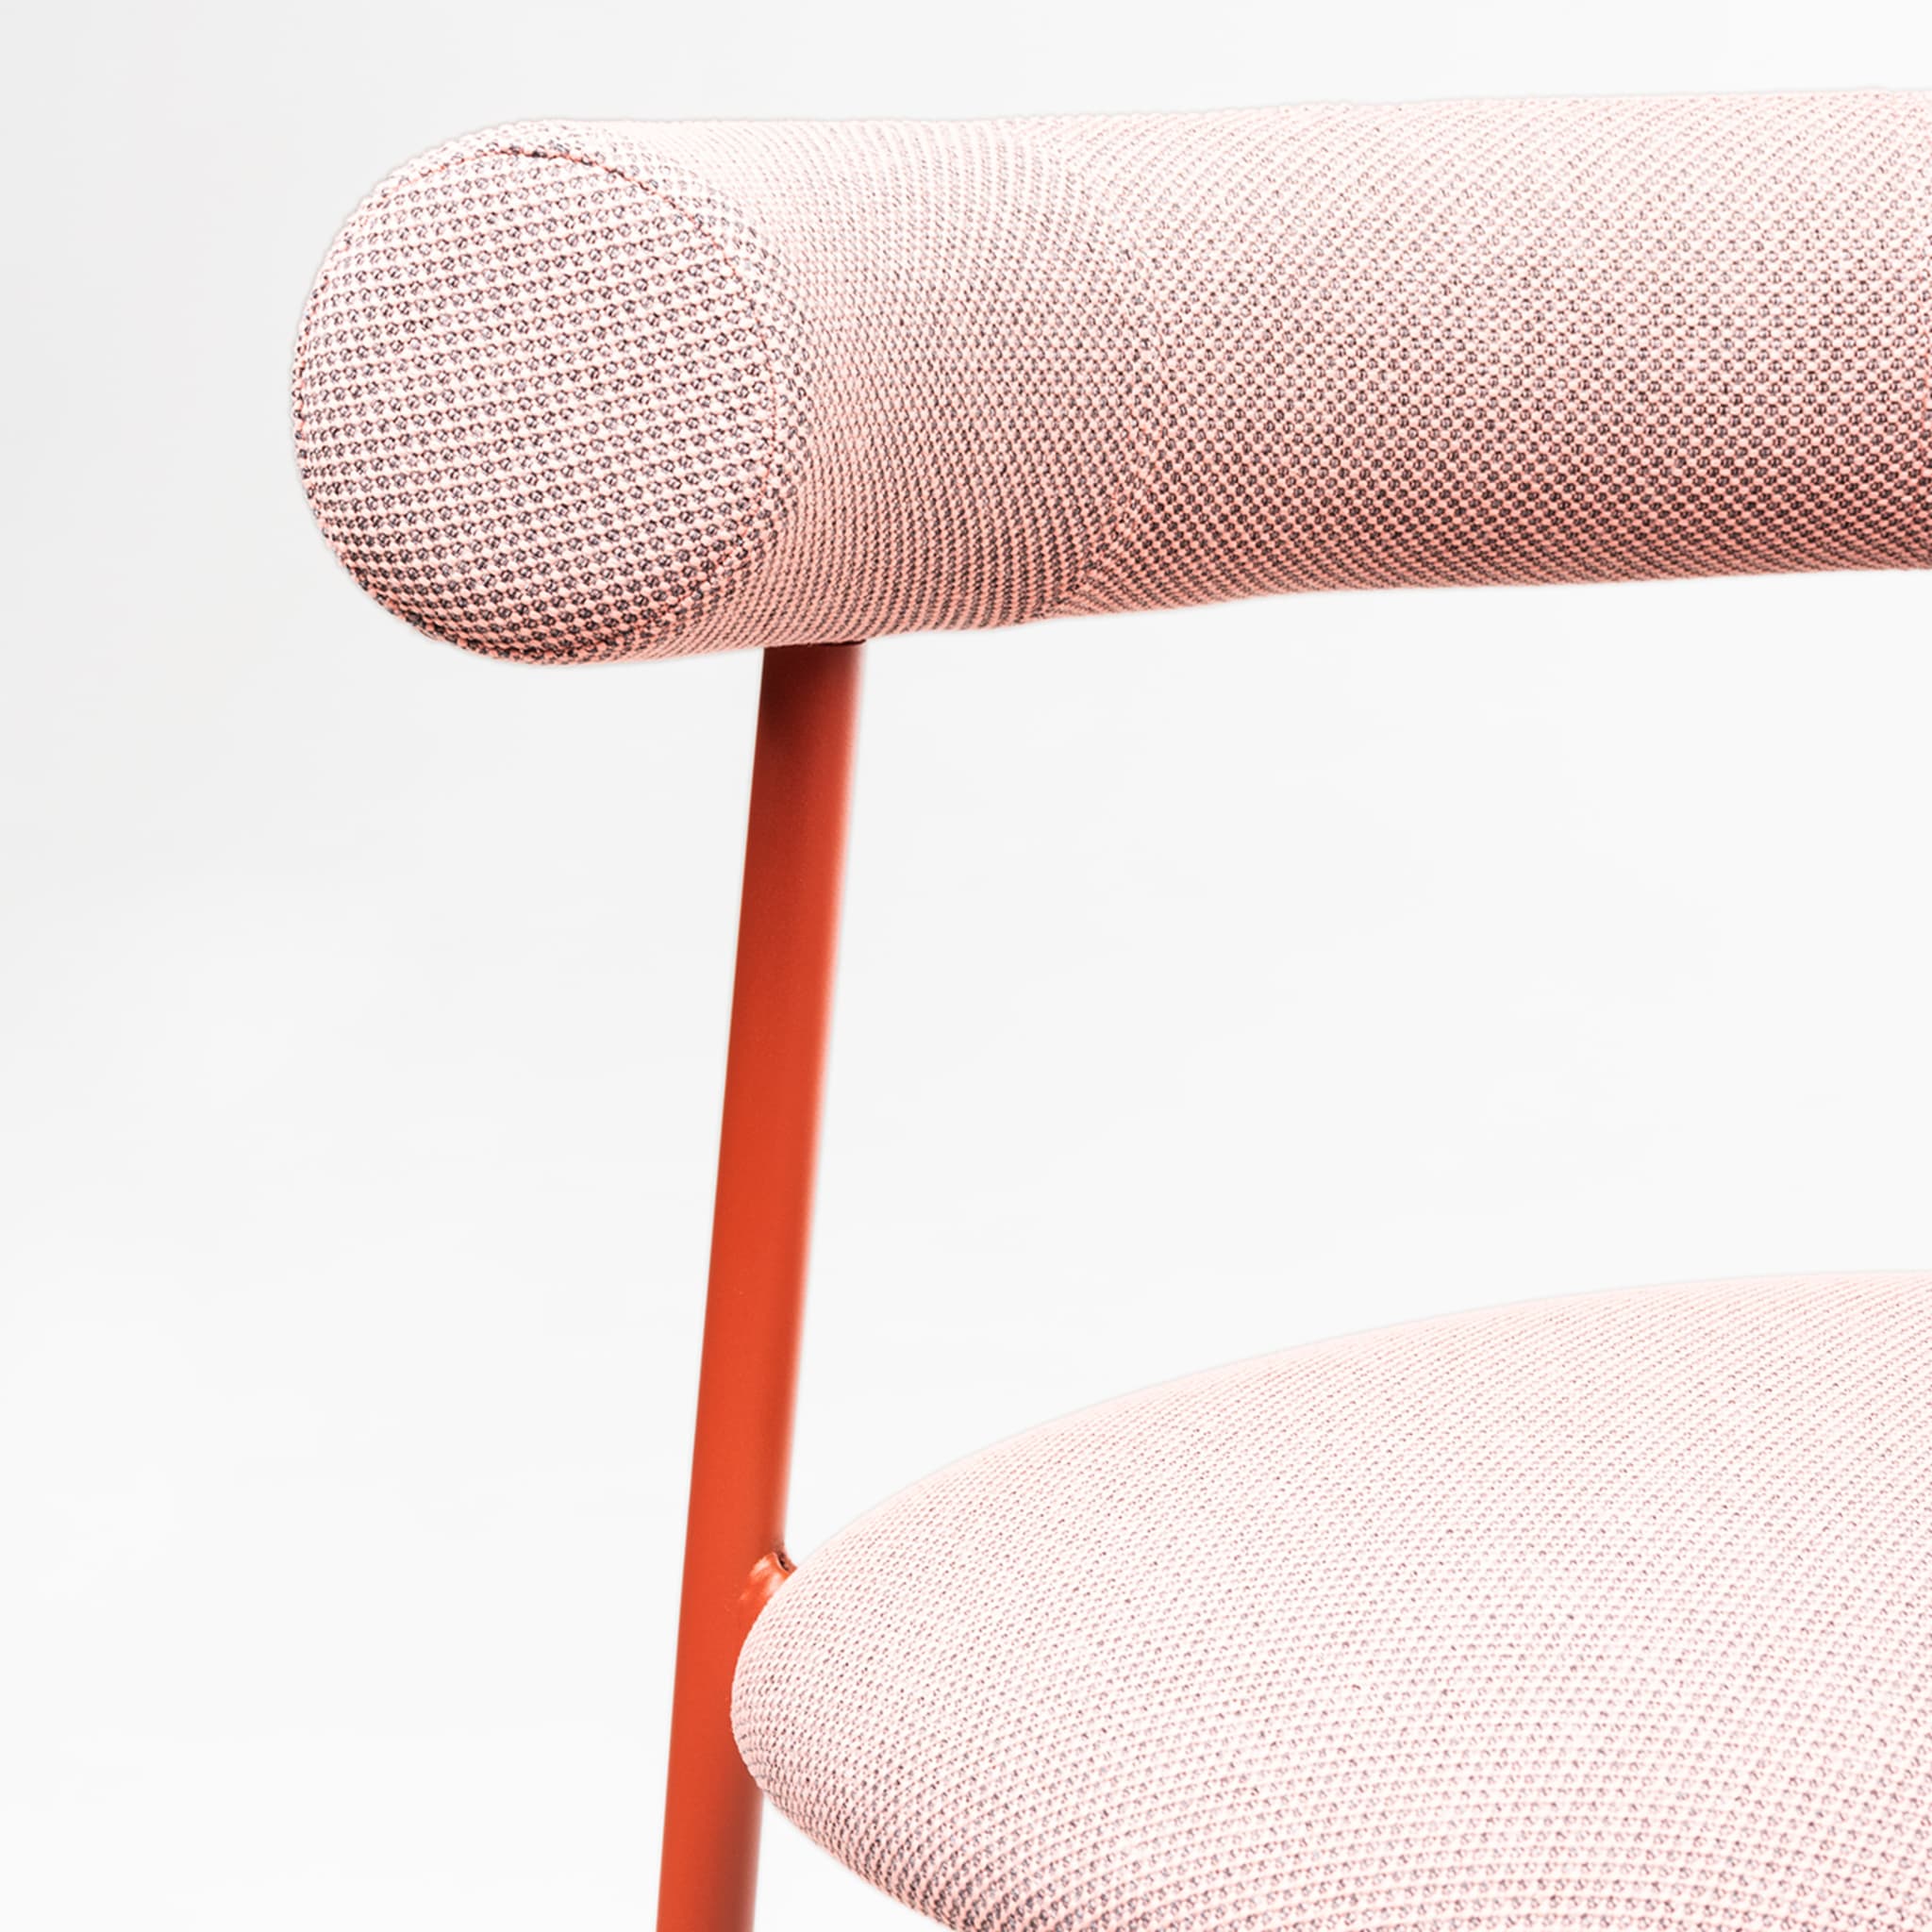 Pampa S Pink & Brick-Red Chair by Studio Pastina - Alternative view 3